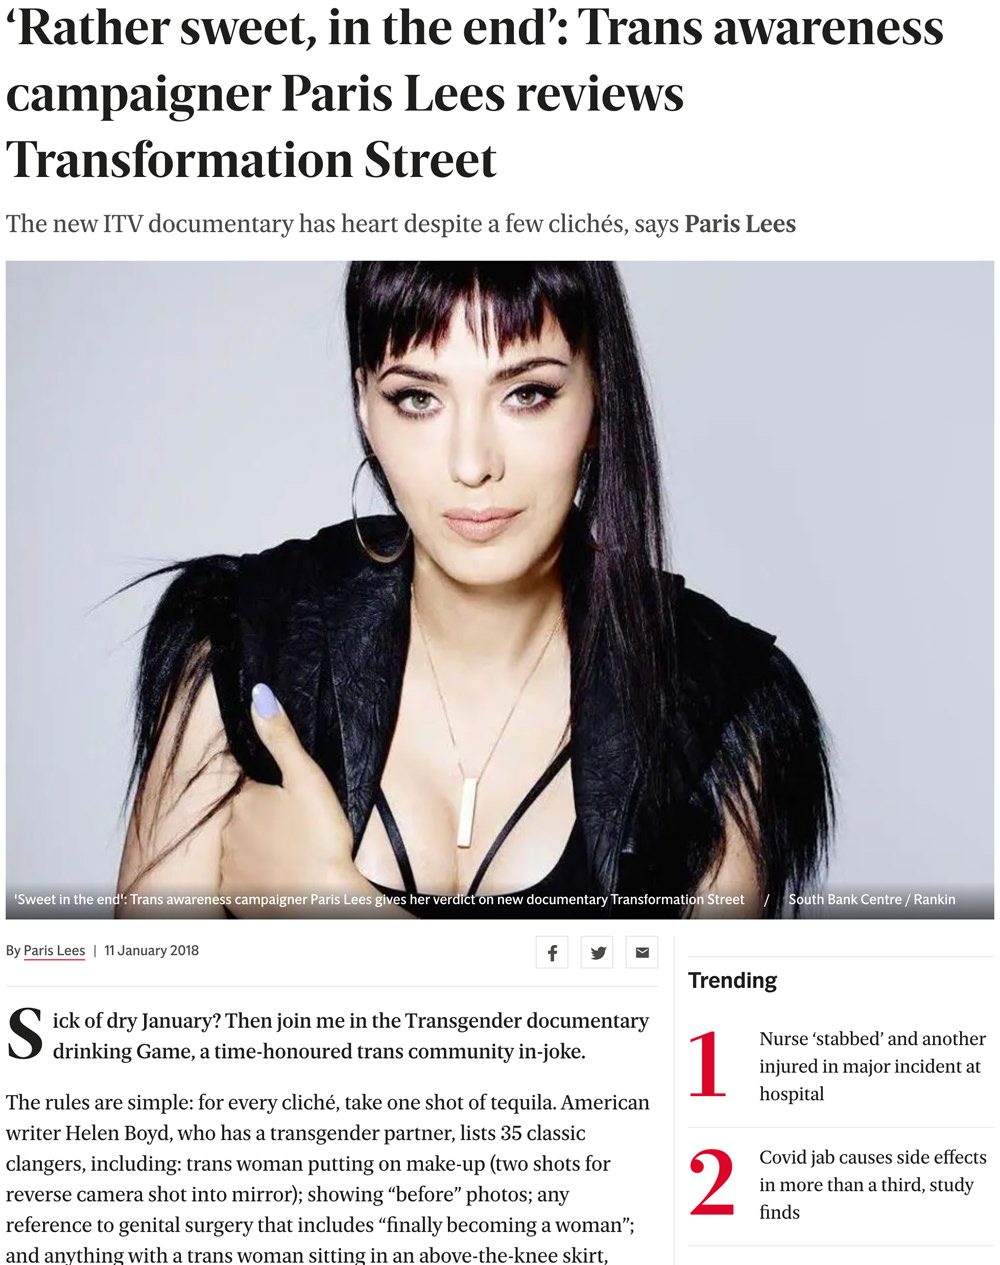 The London Transgender Clinic In The Press